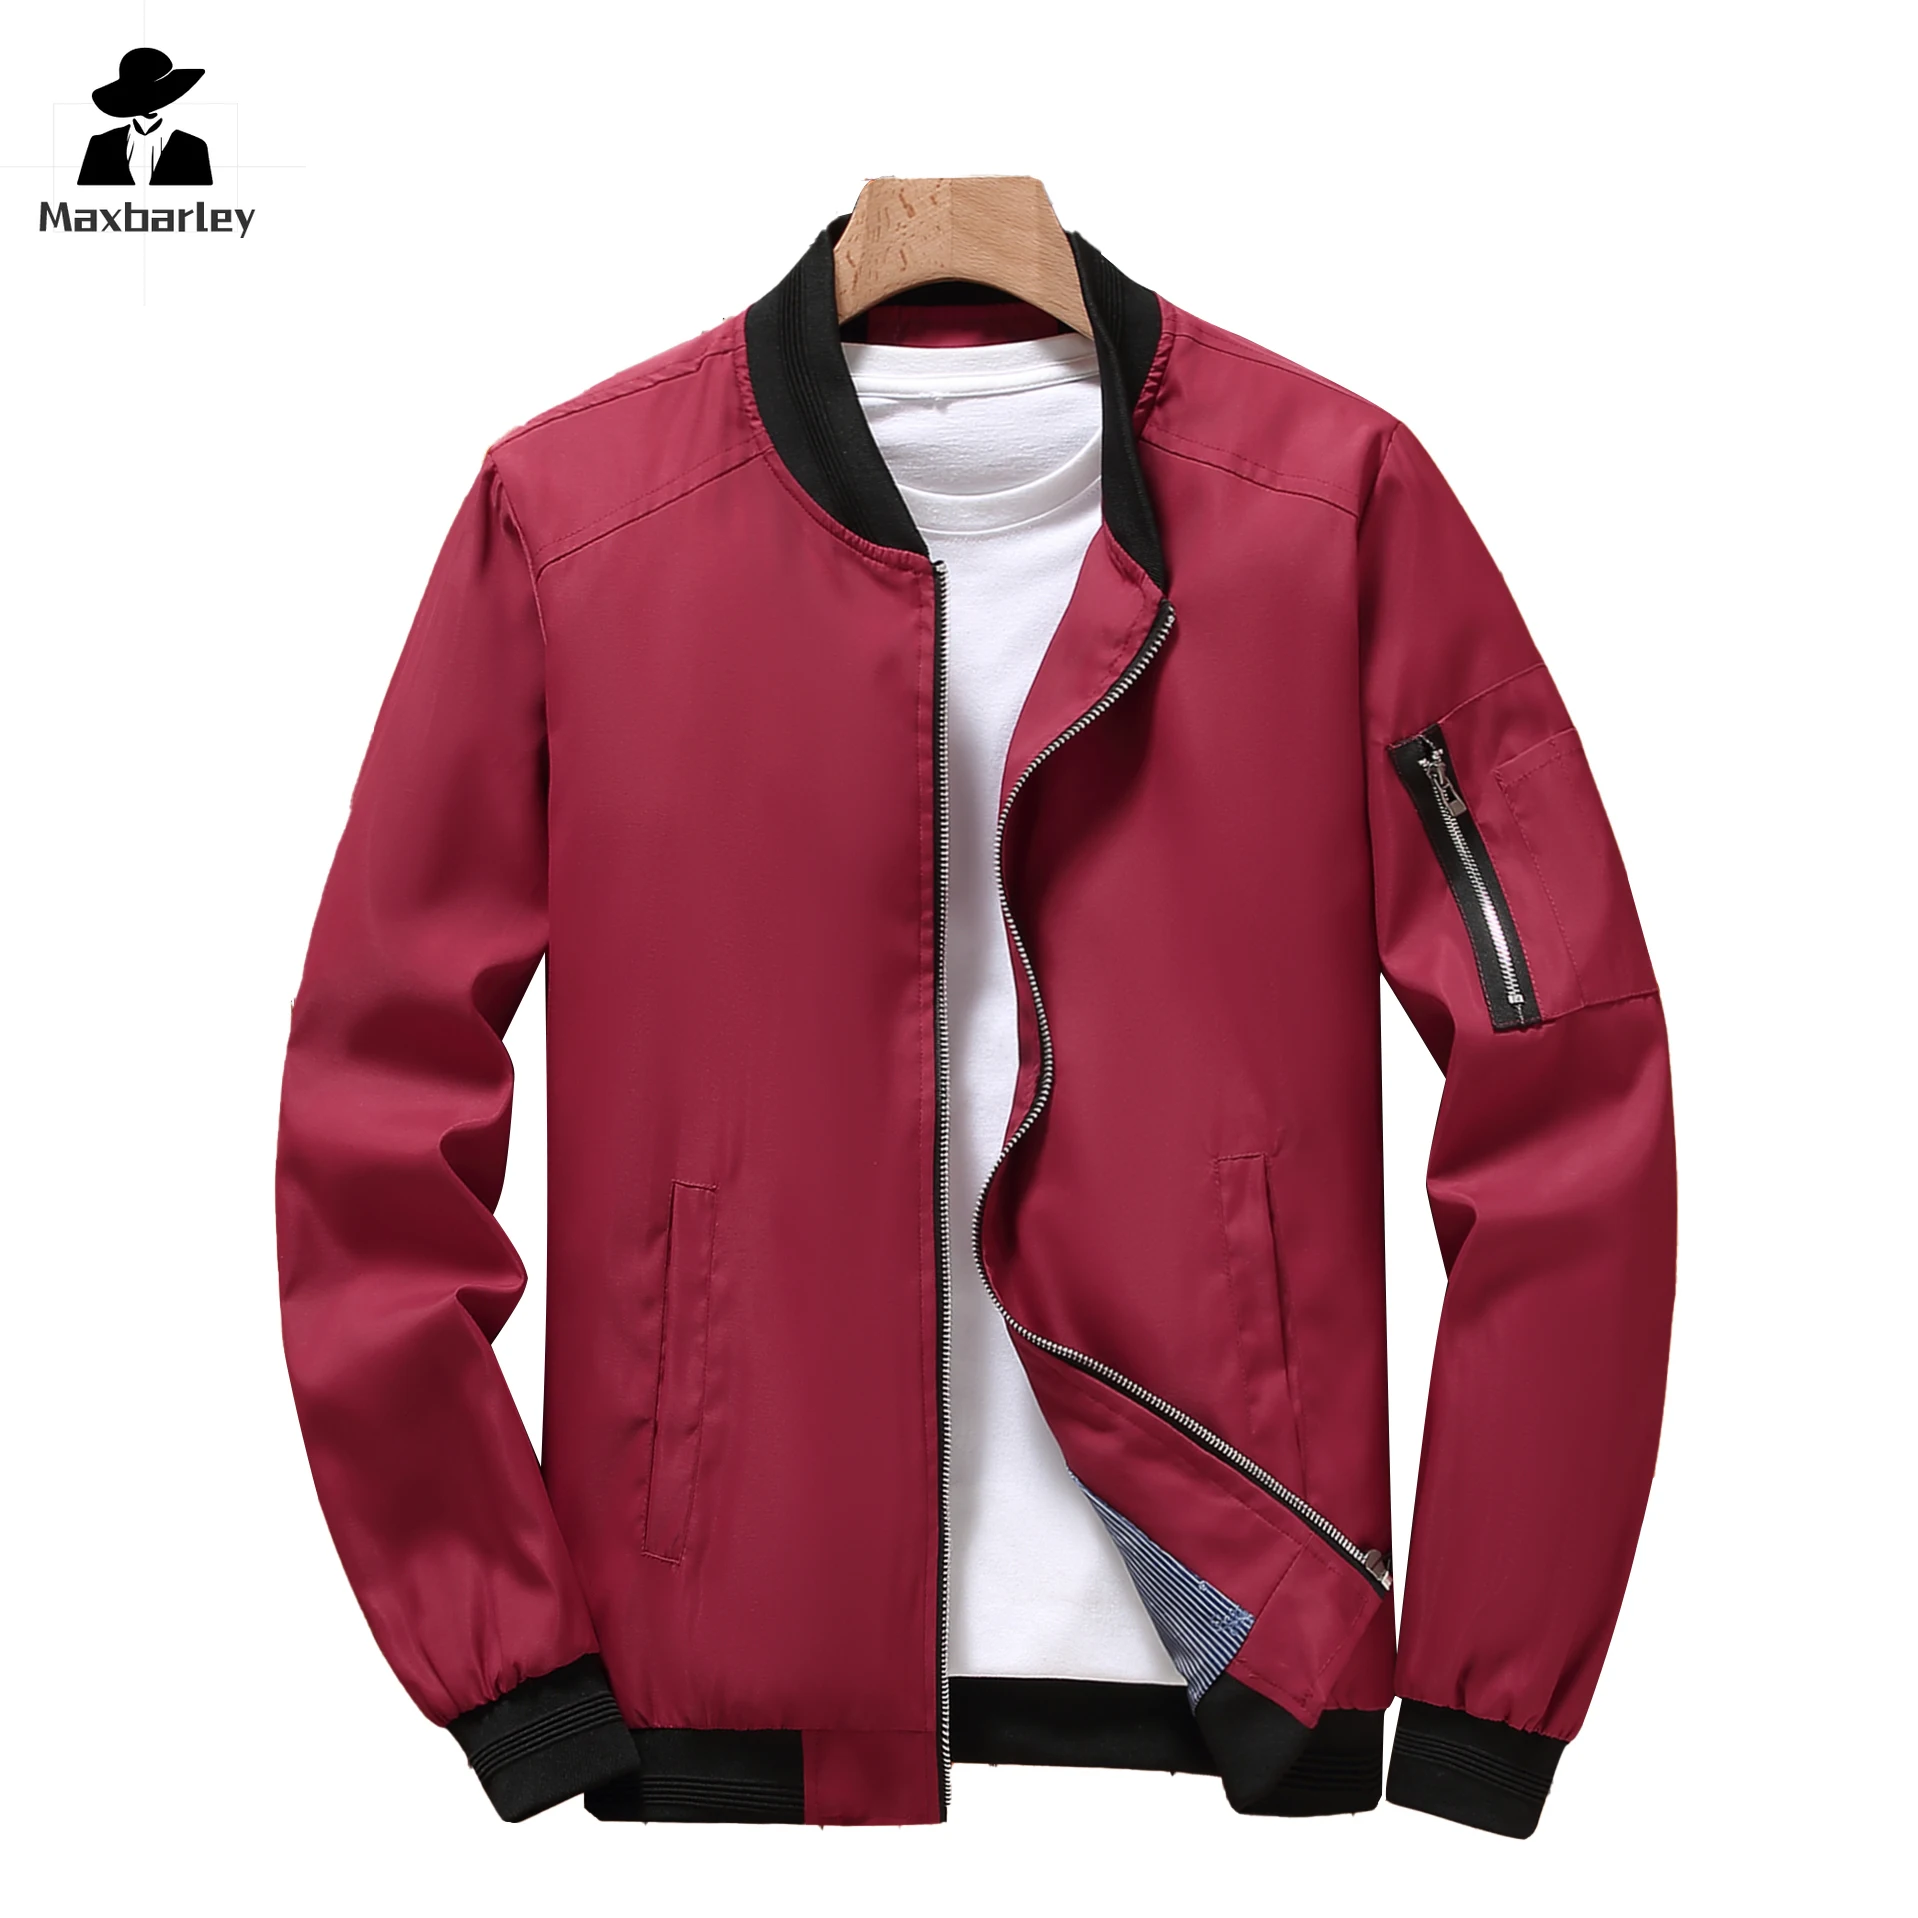 M-6XL Autumn Jacket Men's Thin Baseball Uniform Solid Color Windproof Cycling Coat plus size Loose MA-1 Bomber Jacket Men fashion women autumn winter keep warm touchscreen thin cashmere solid simple gloves cycling drive suede fabric elegant windproof